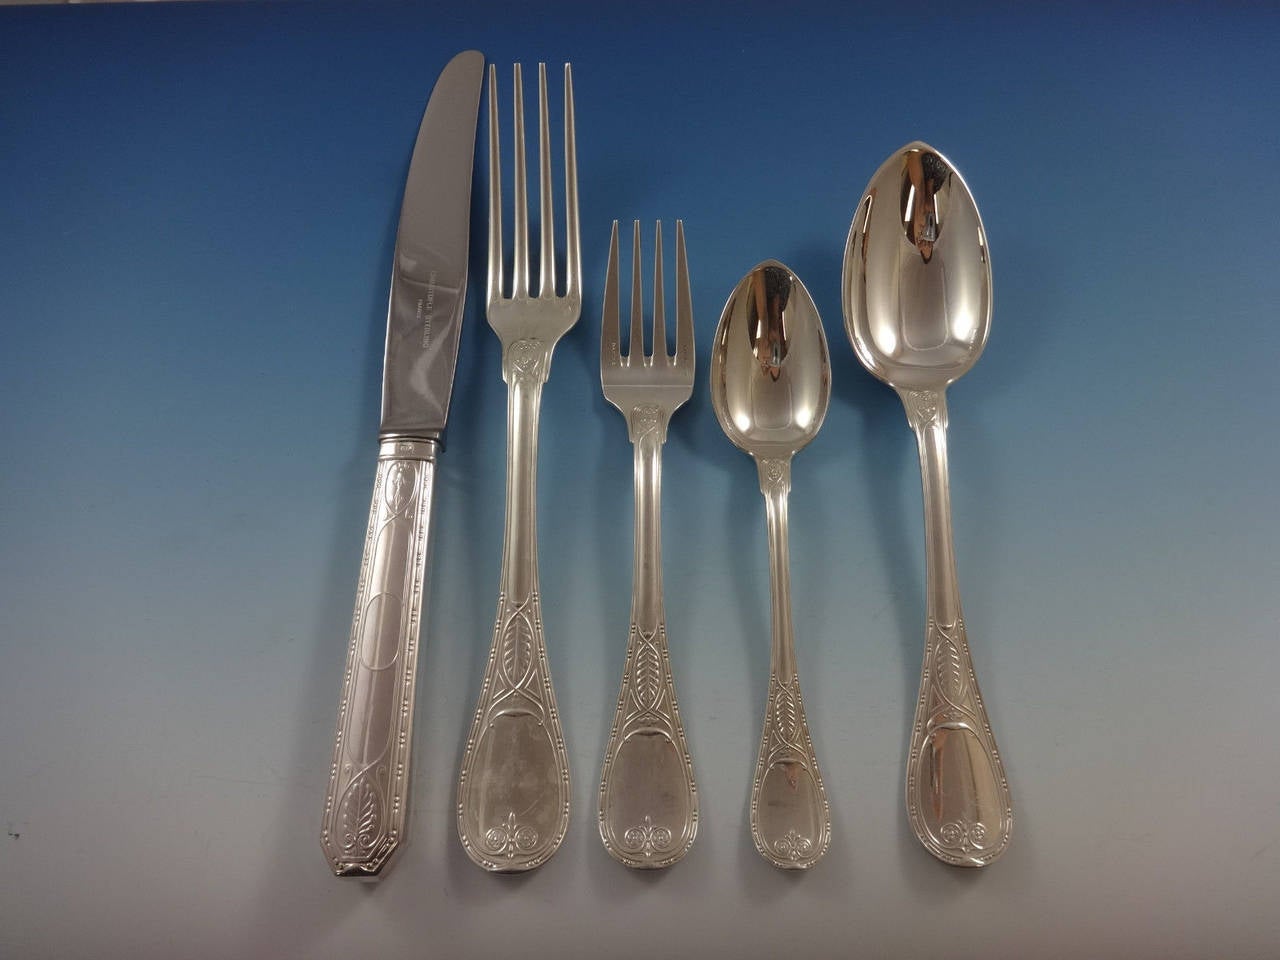 Christofle sterling set.

Christofle French silver flatware has been crafted by master artisans since 1830.

The revolutionary style and character of Christofle dinnerware comes from collaborations with groundbreaking architects, designers and